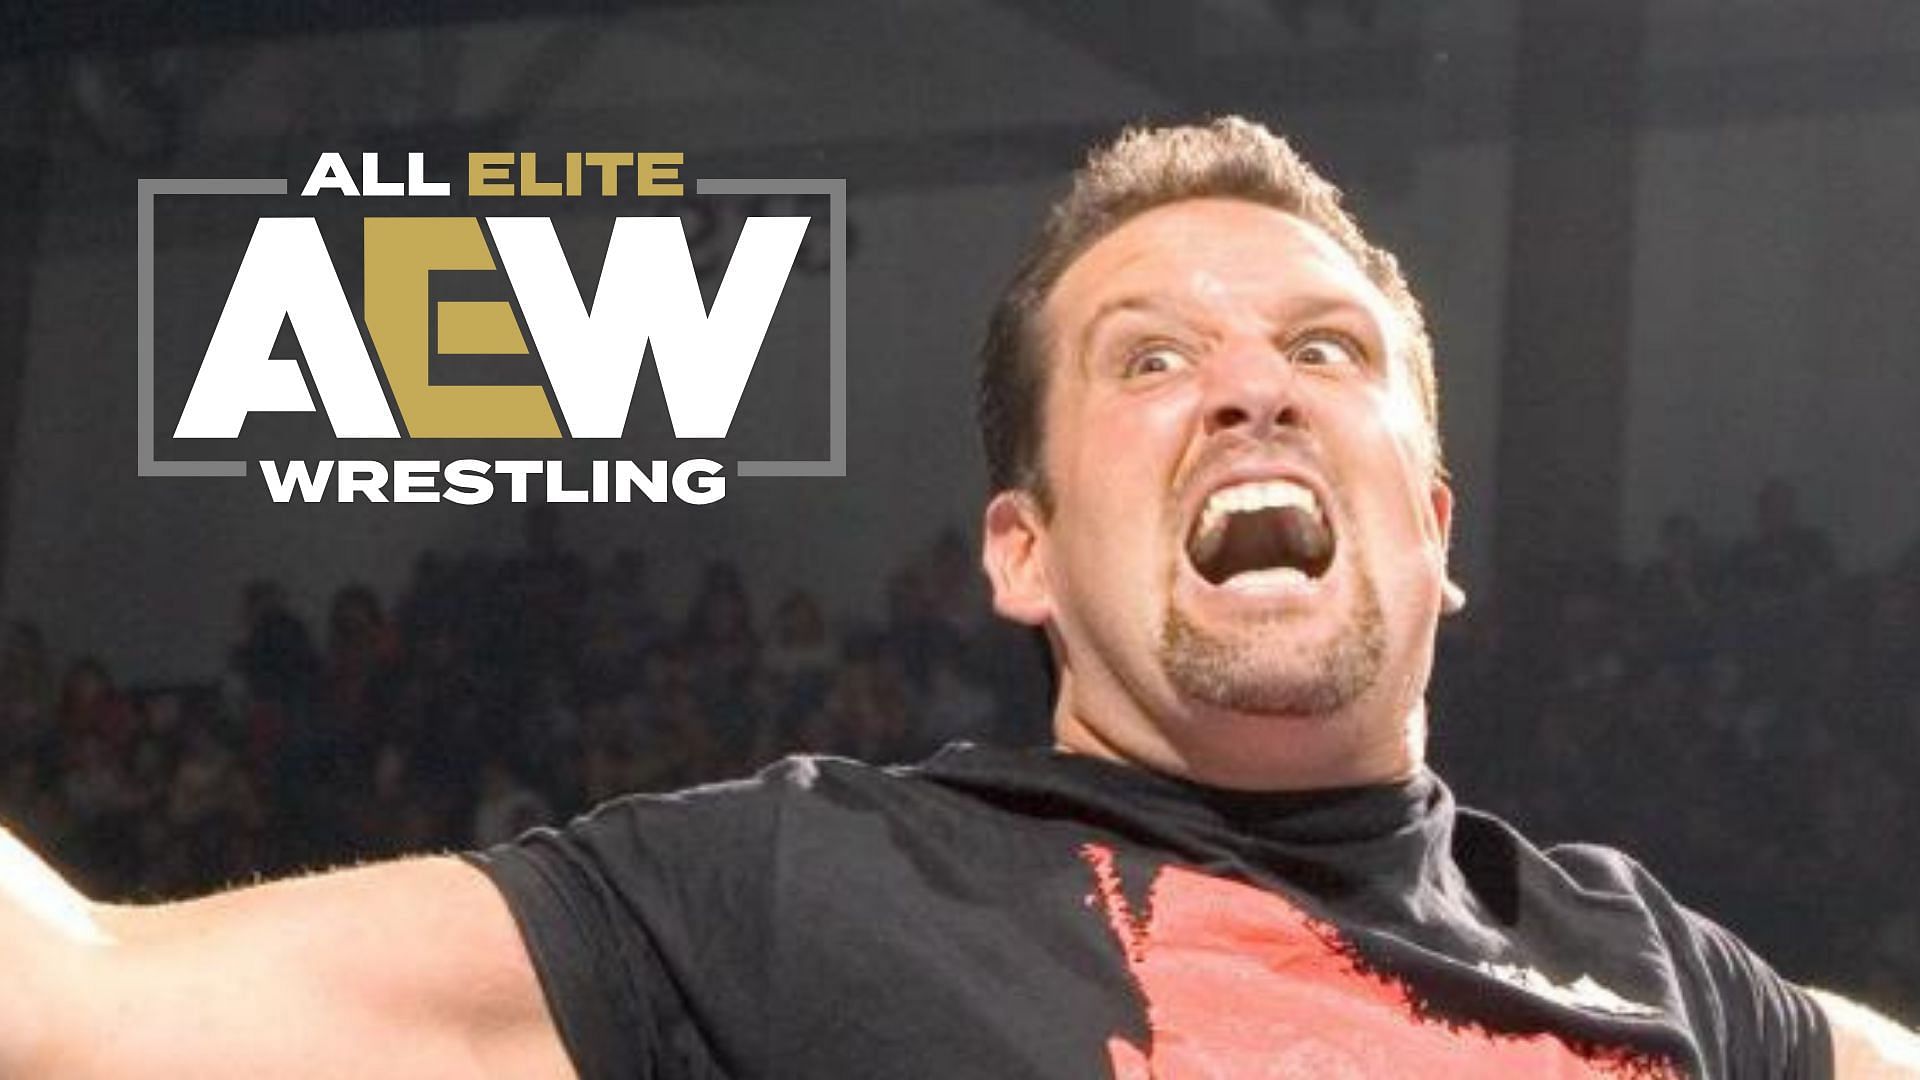 Tommy Dreamer has made a prediction about a top AEW stable